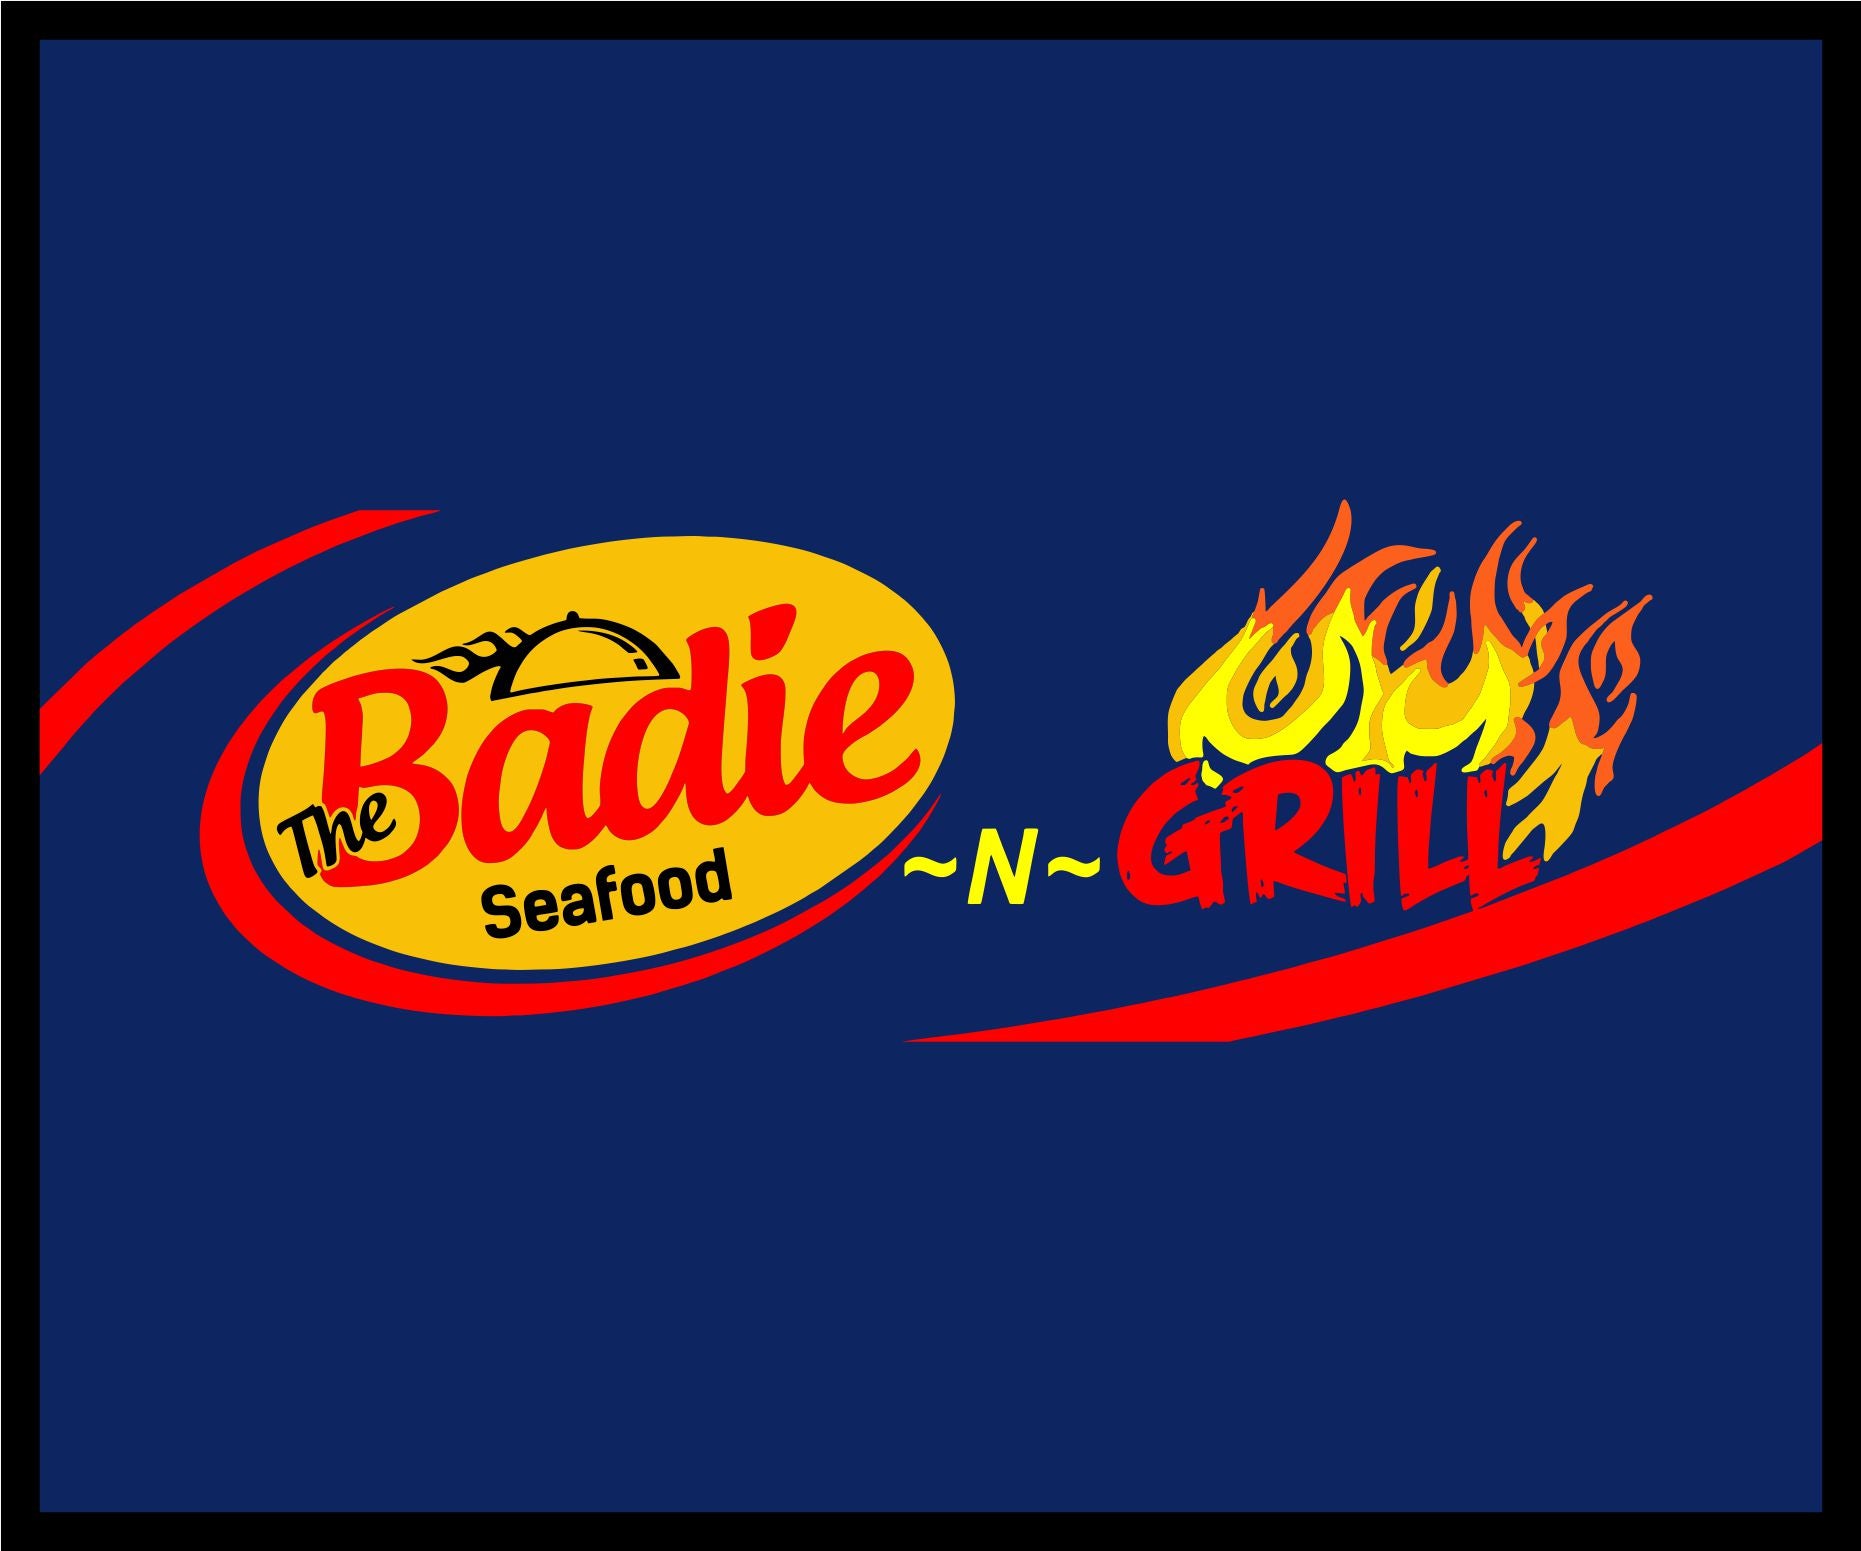 The Badie Seafood and Grill